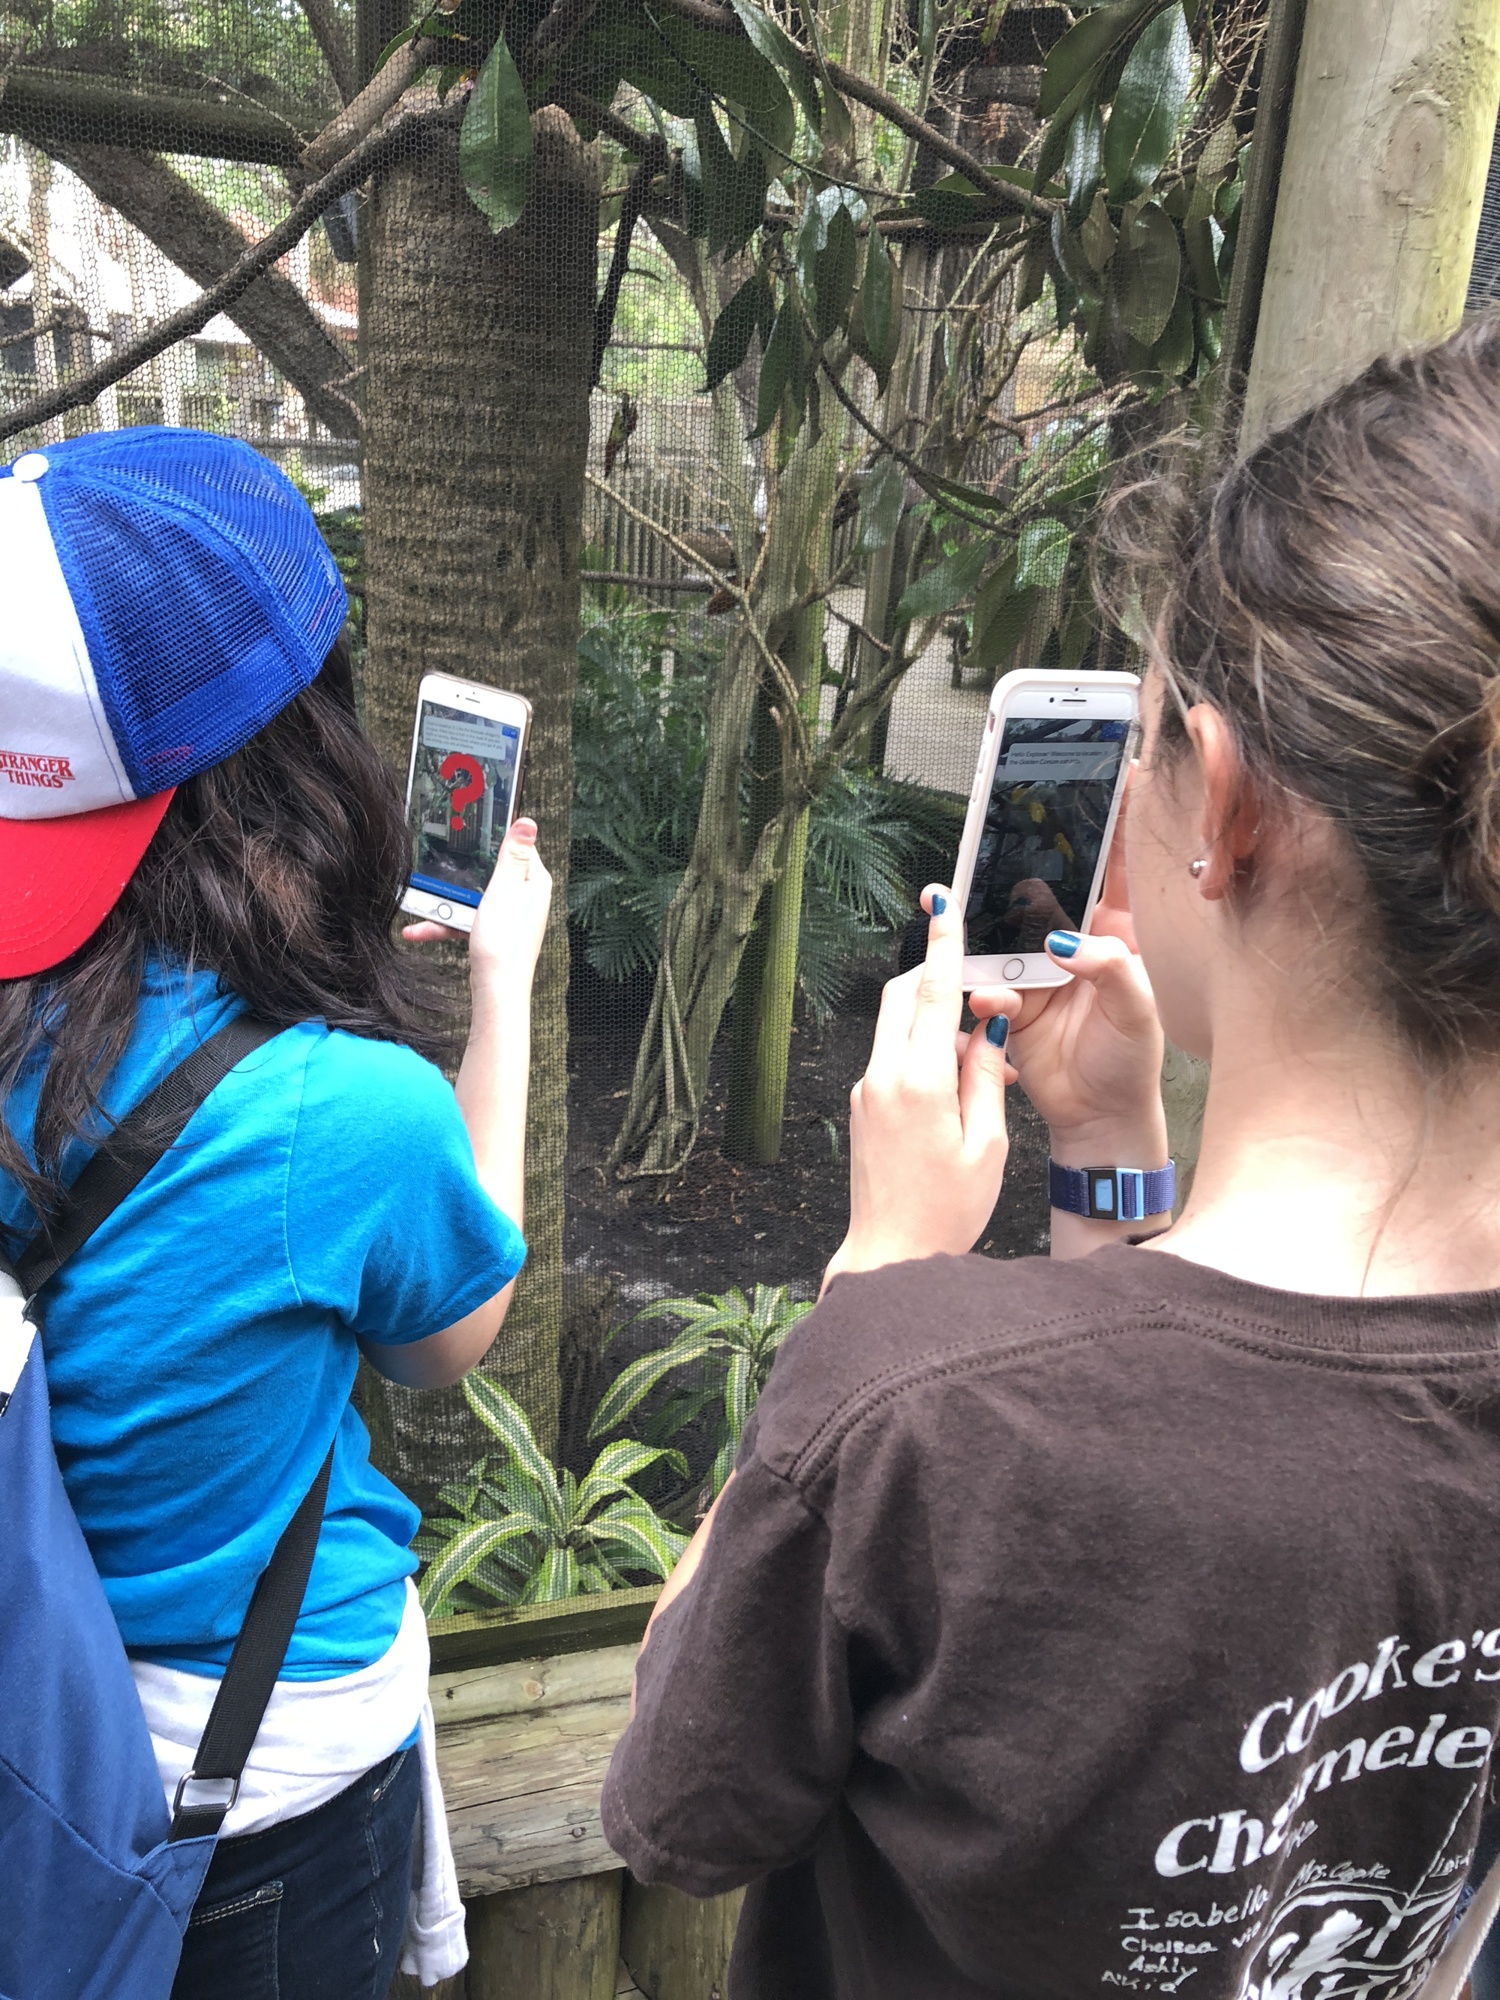 Gabby Battaglia and Kirra Taylor try out i3 Academy's augmented reality scavenger hunt game at the St. Augustine Alligator Farm. Photo courtesy of Corinne Schaefer